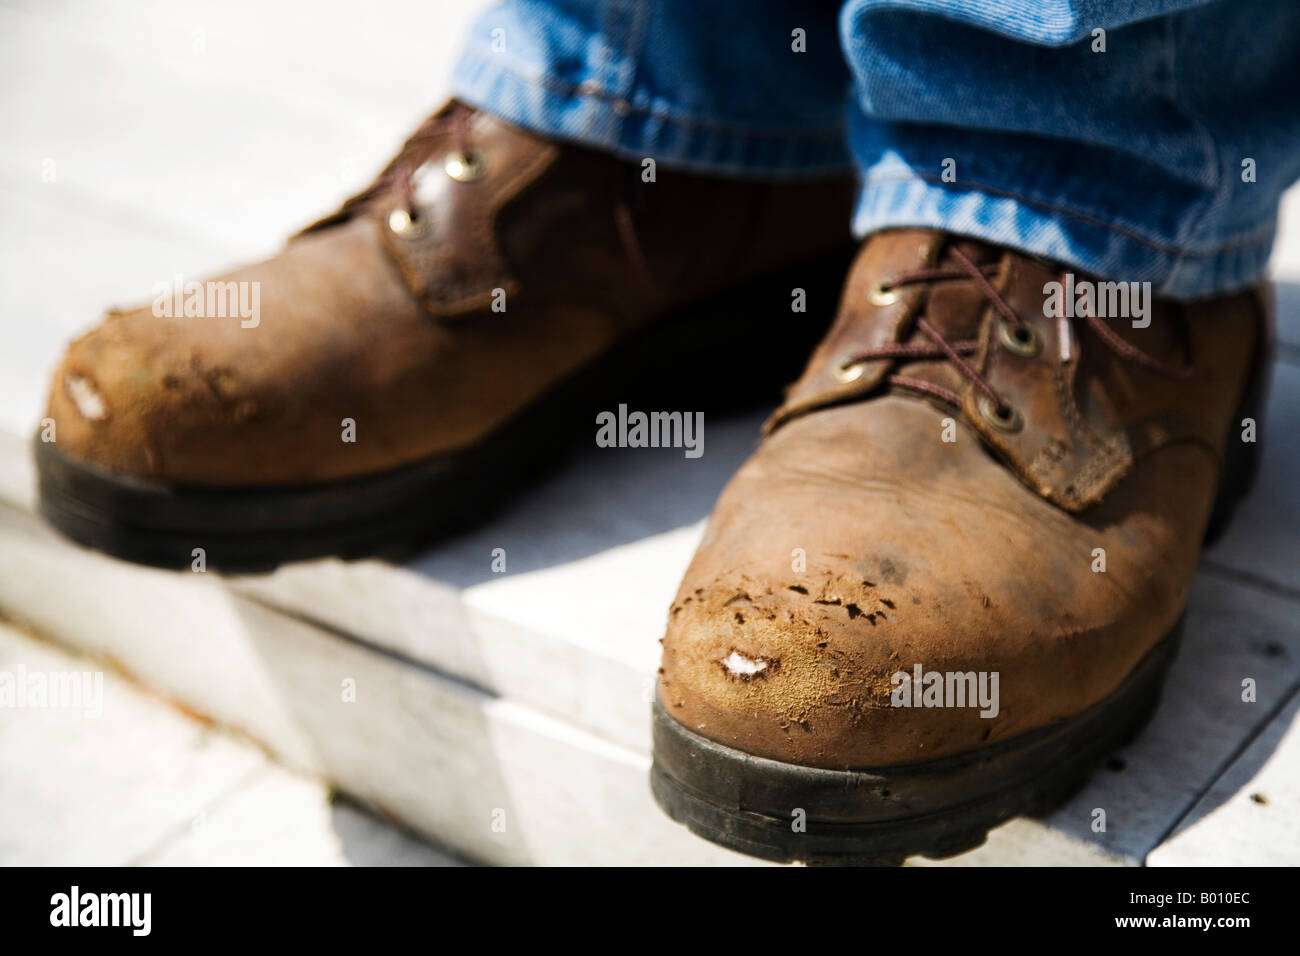 Close-up of work Boots. Stock Photo